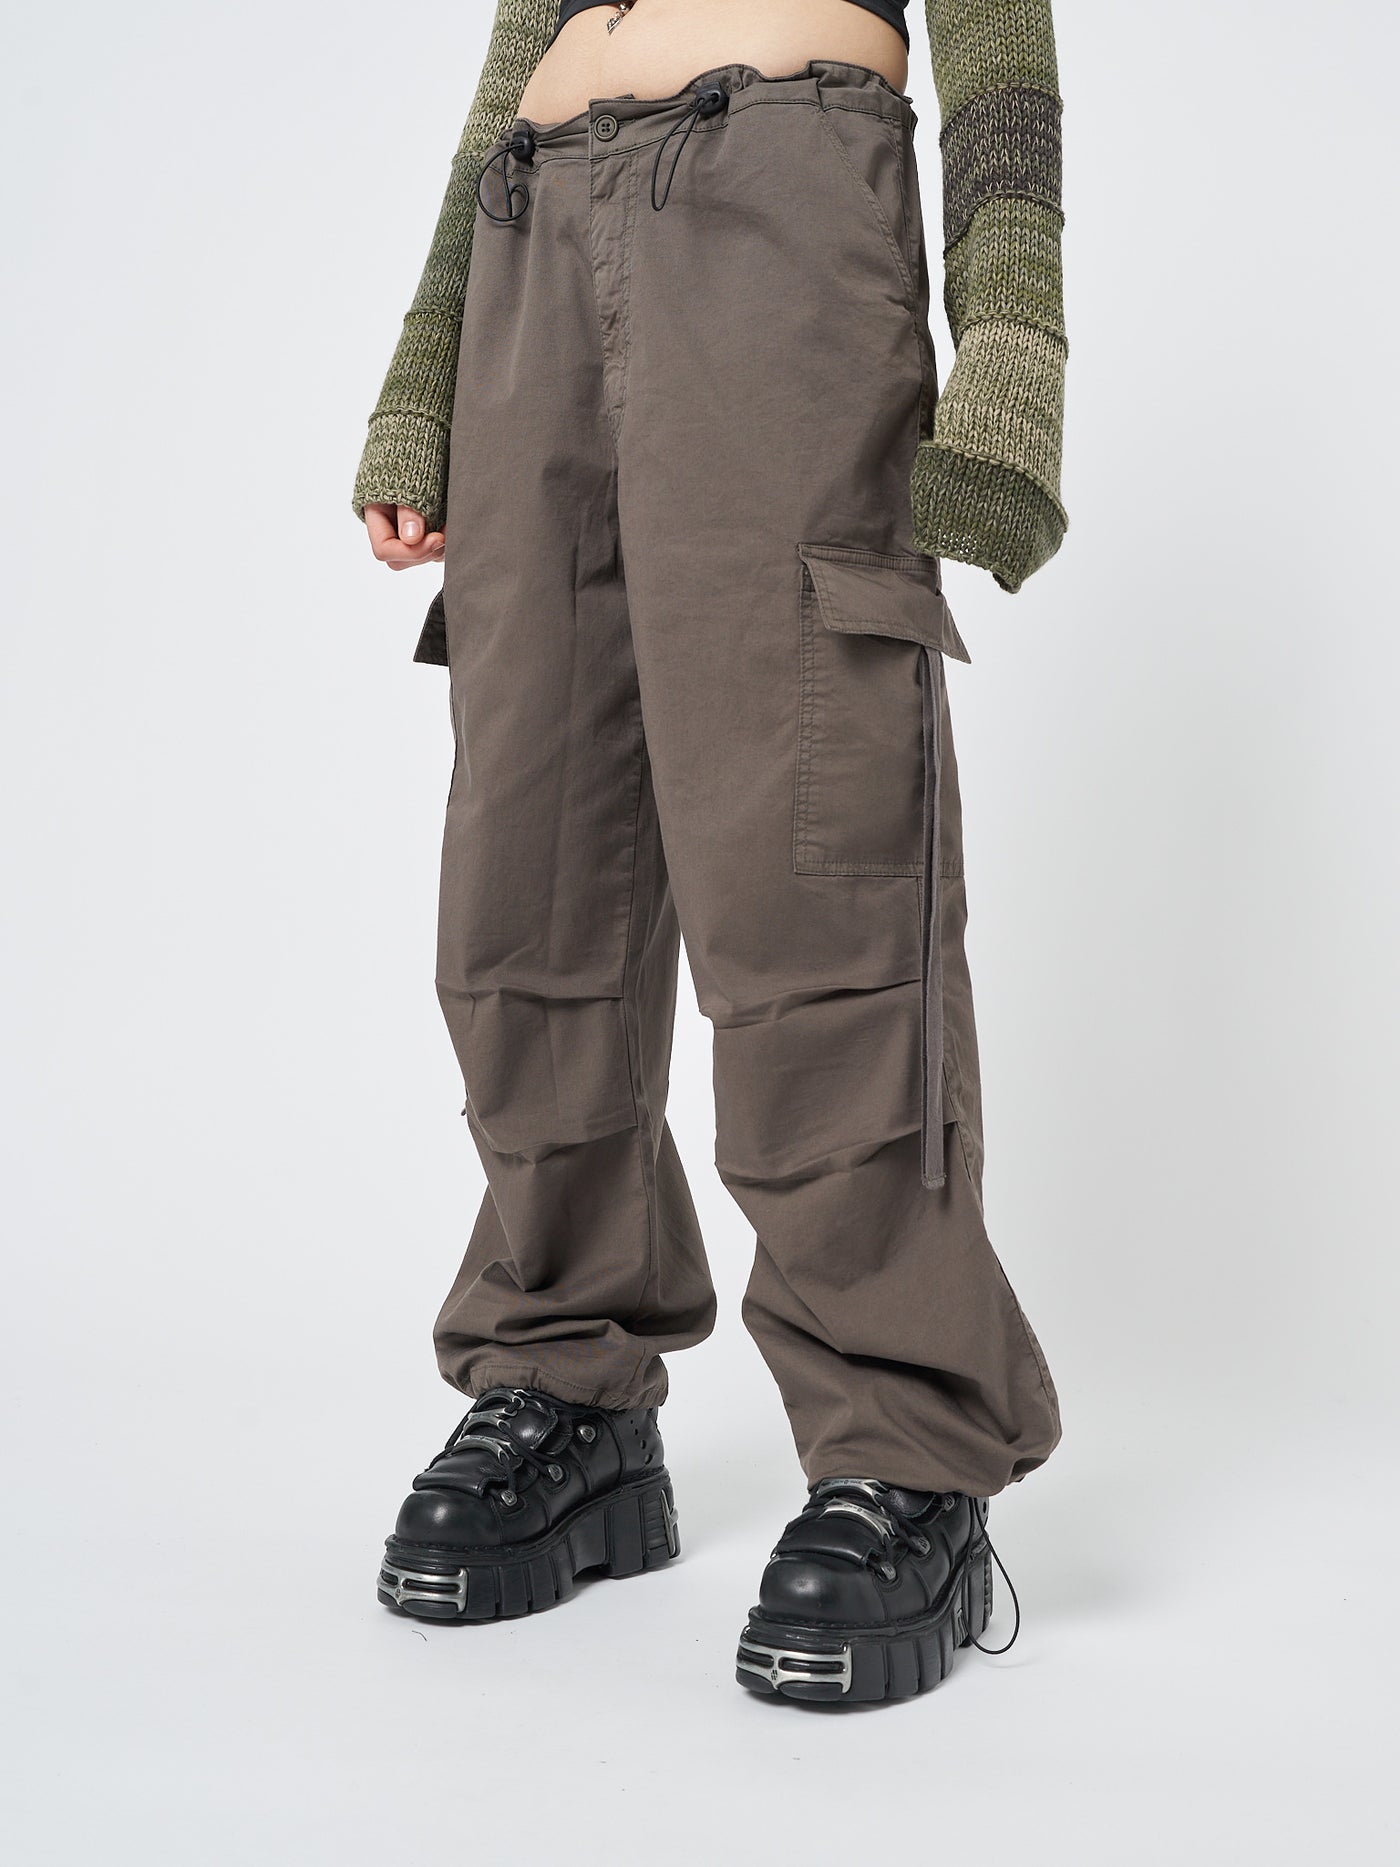 Stylish and functional cargo pants in a versatile brown color, perfect for a tech-inspired look.